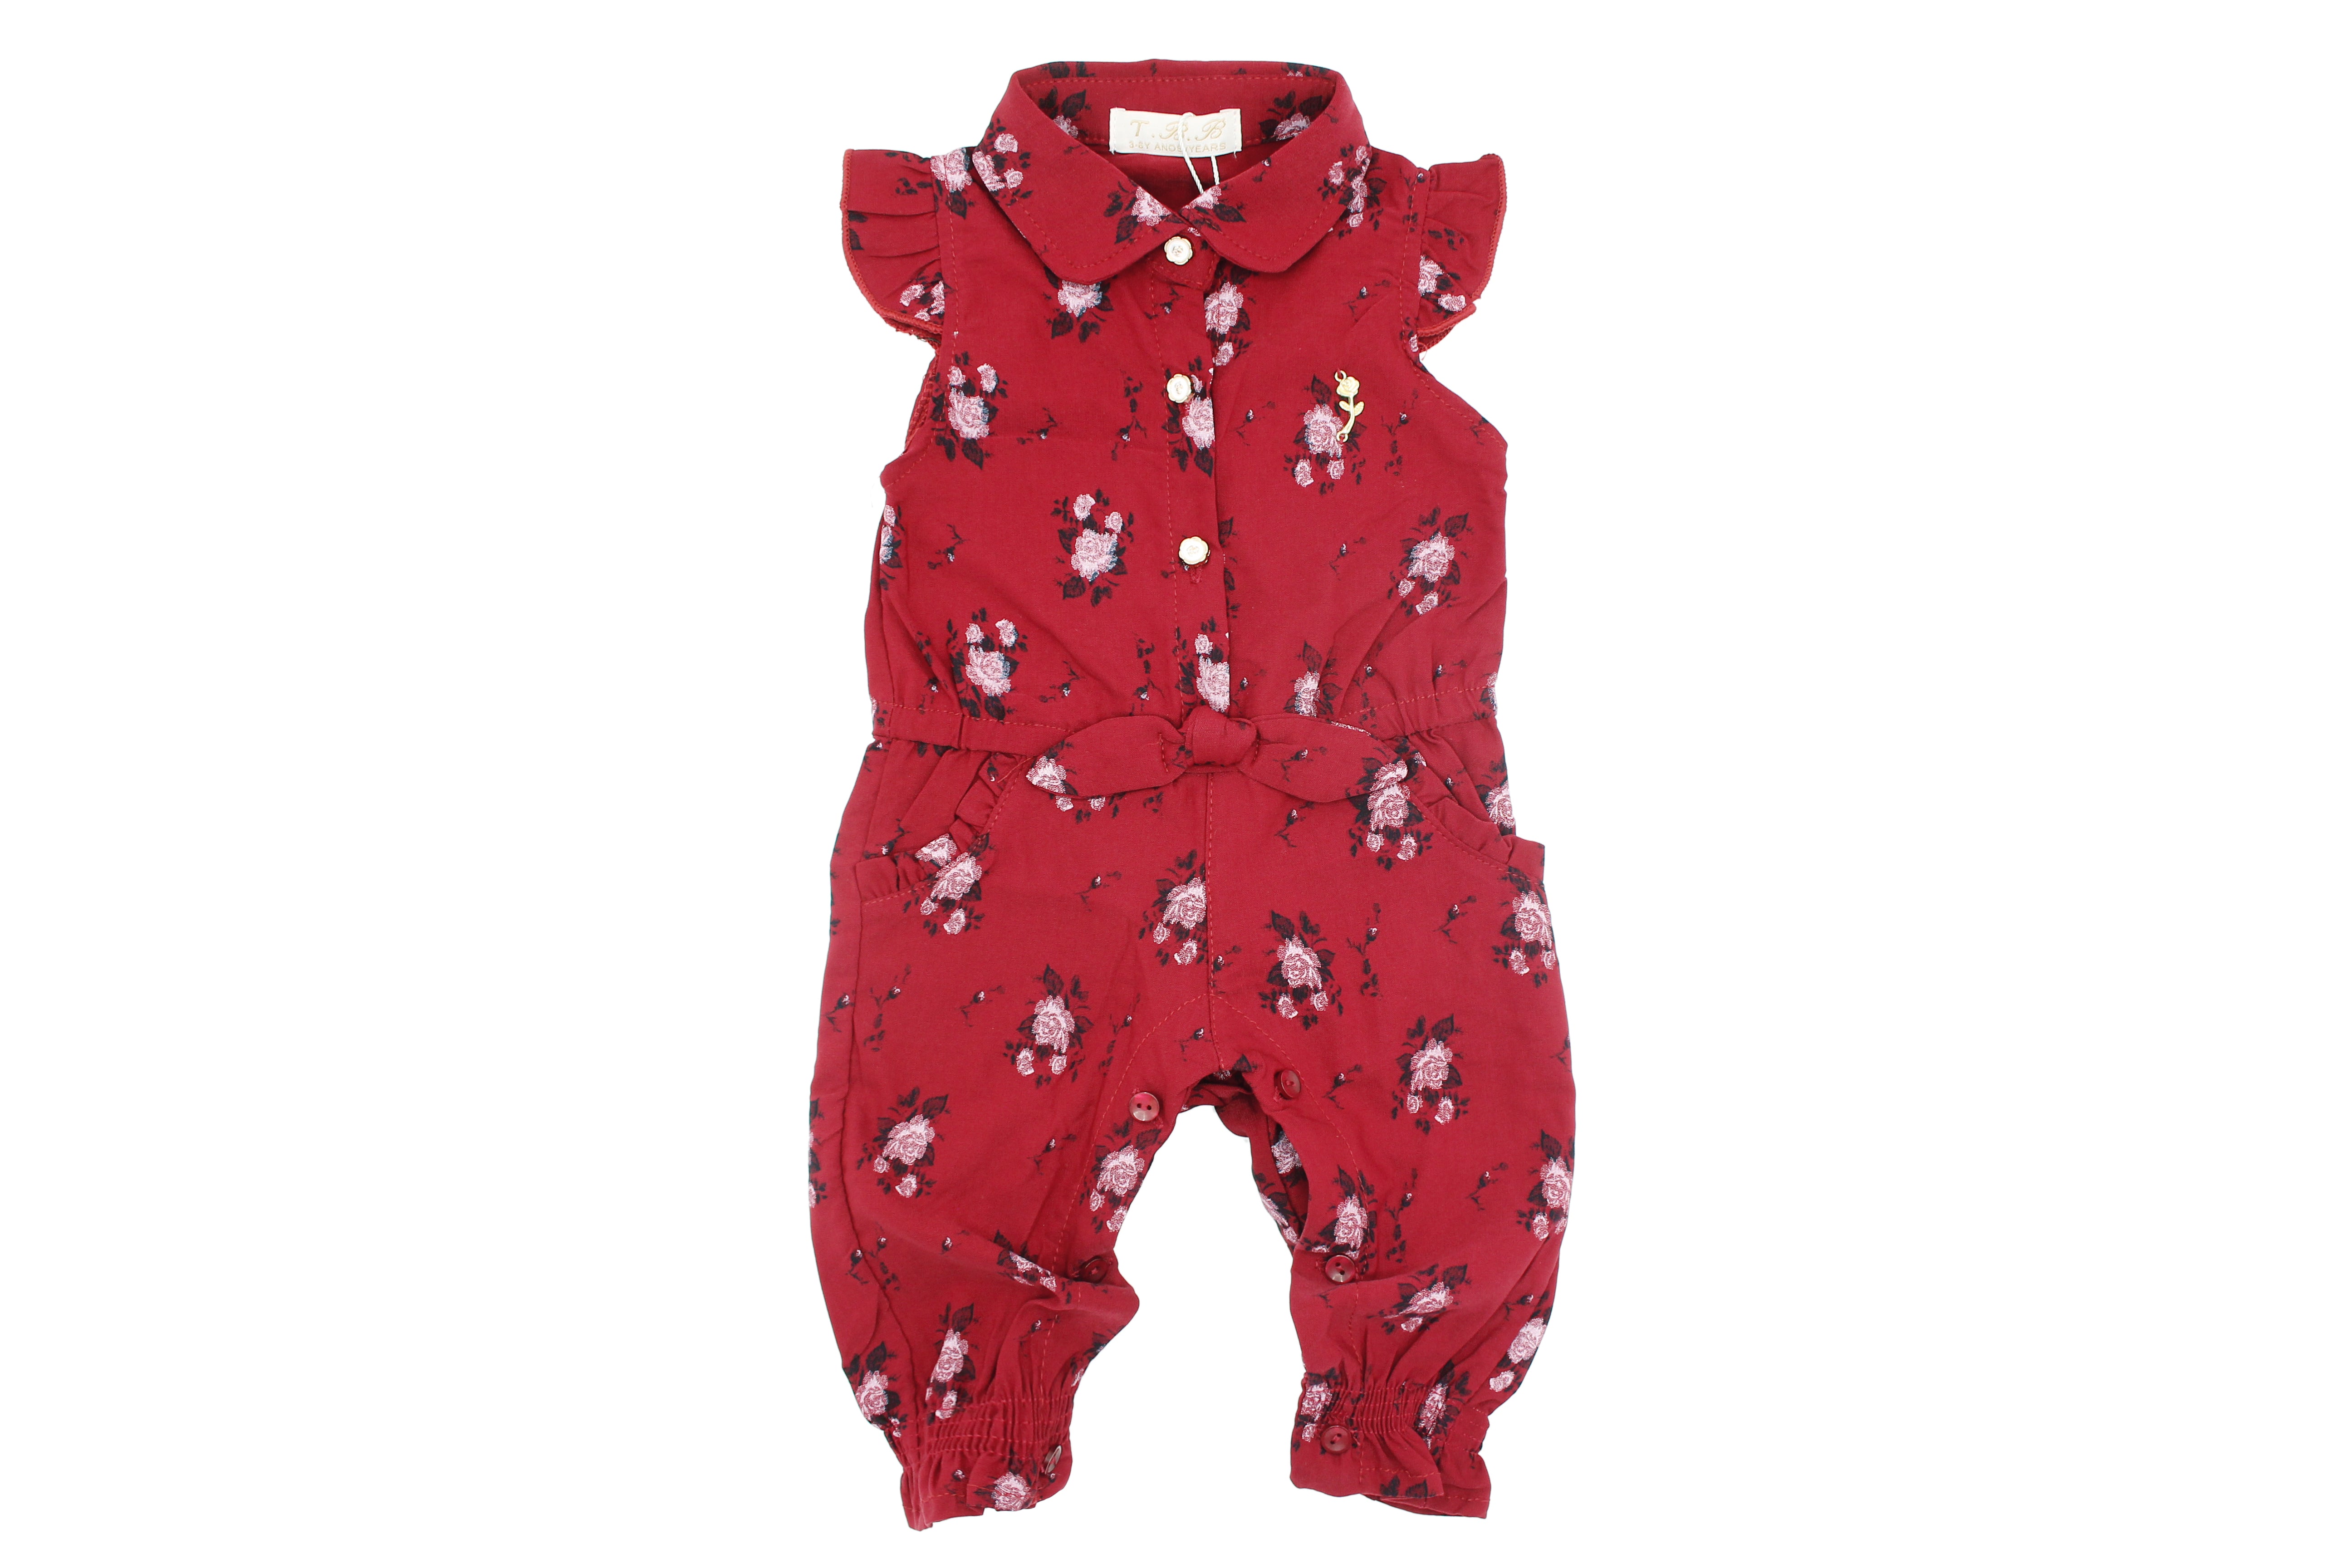 BABY GIRL JUMPSUIT - 31050